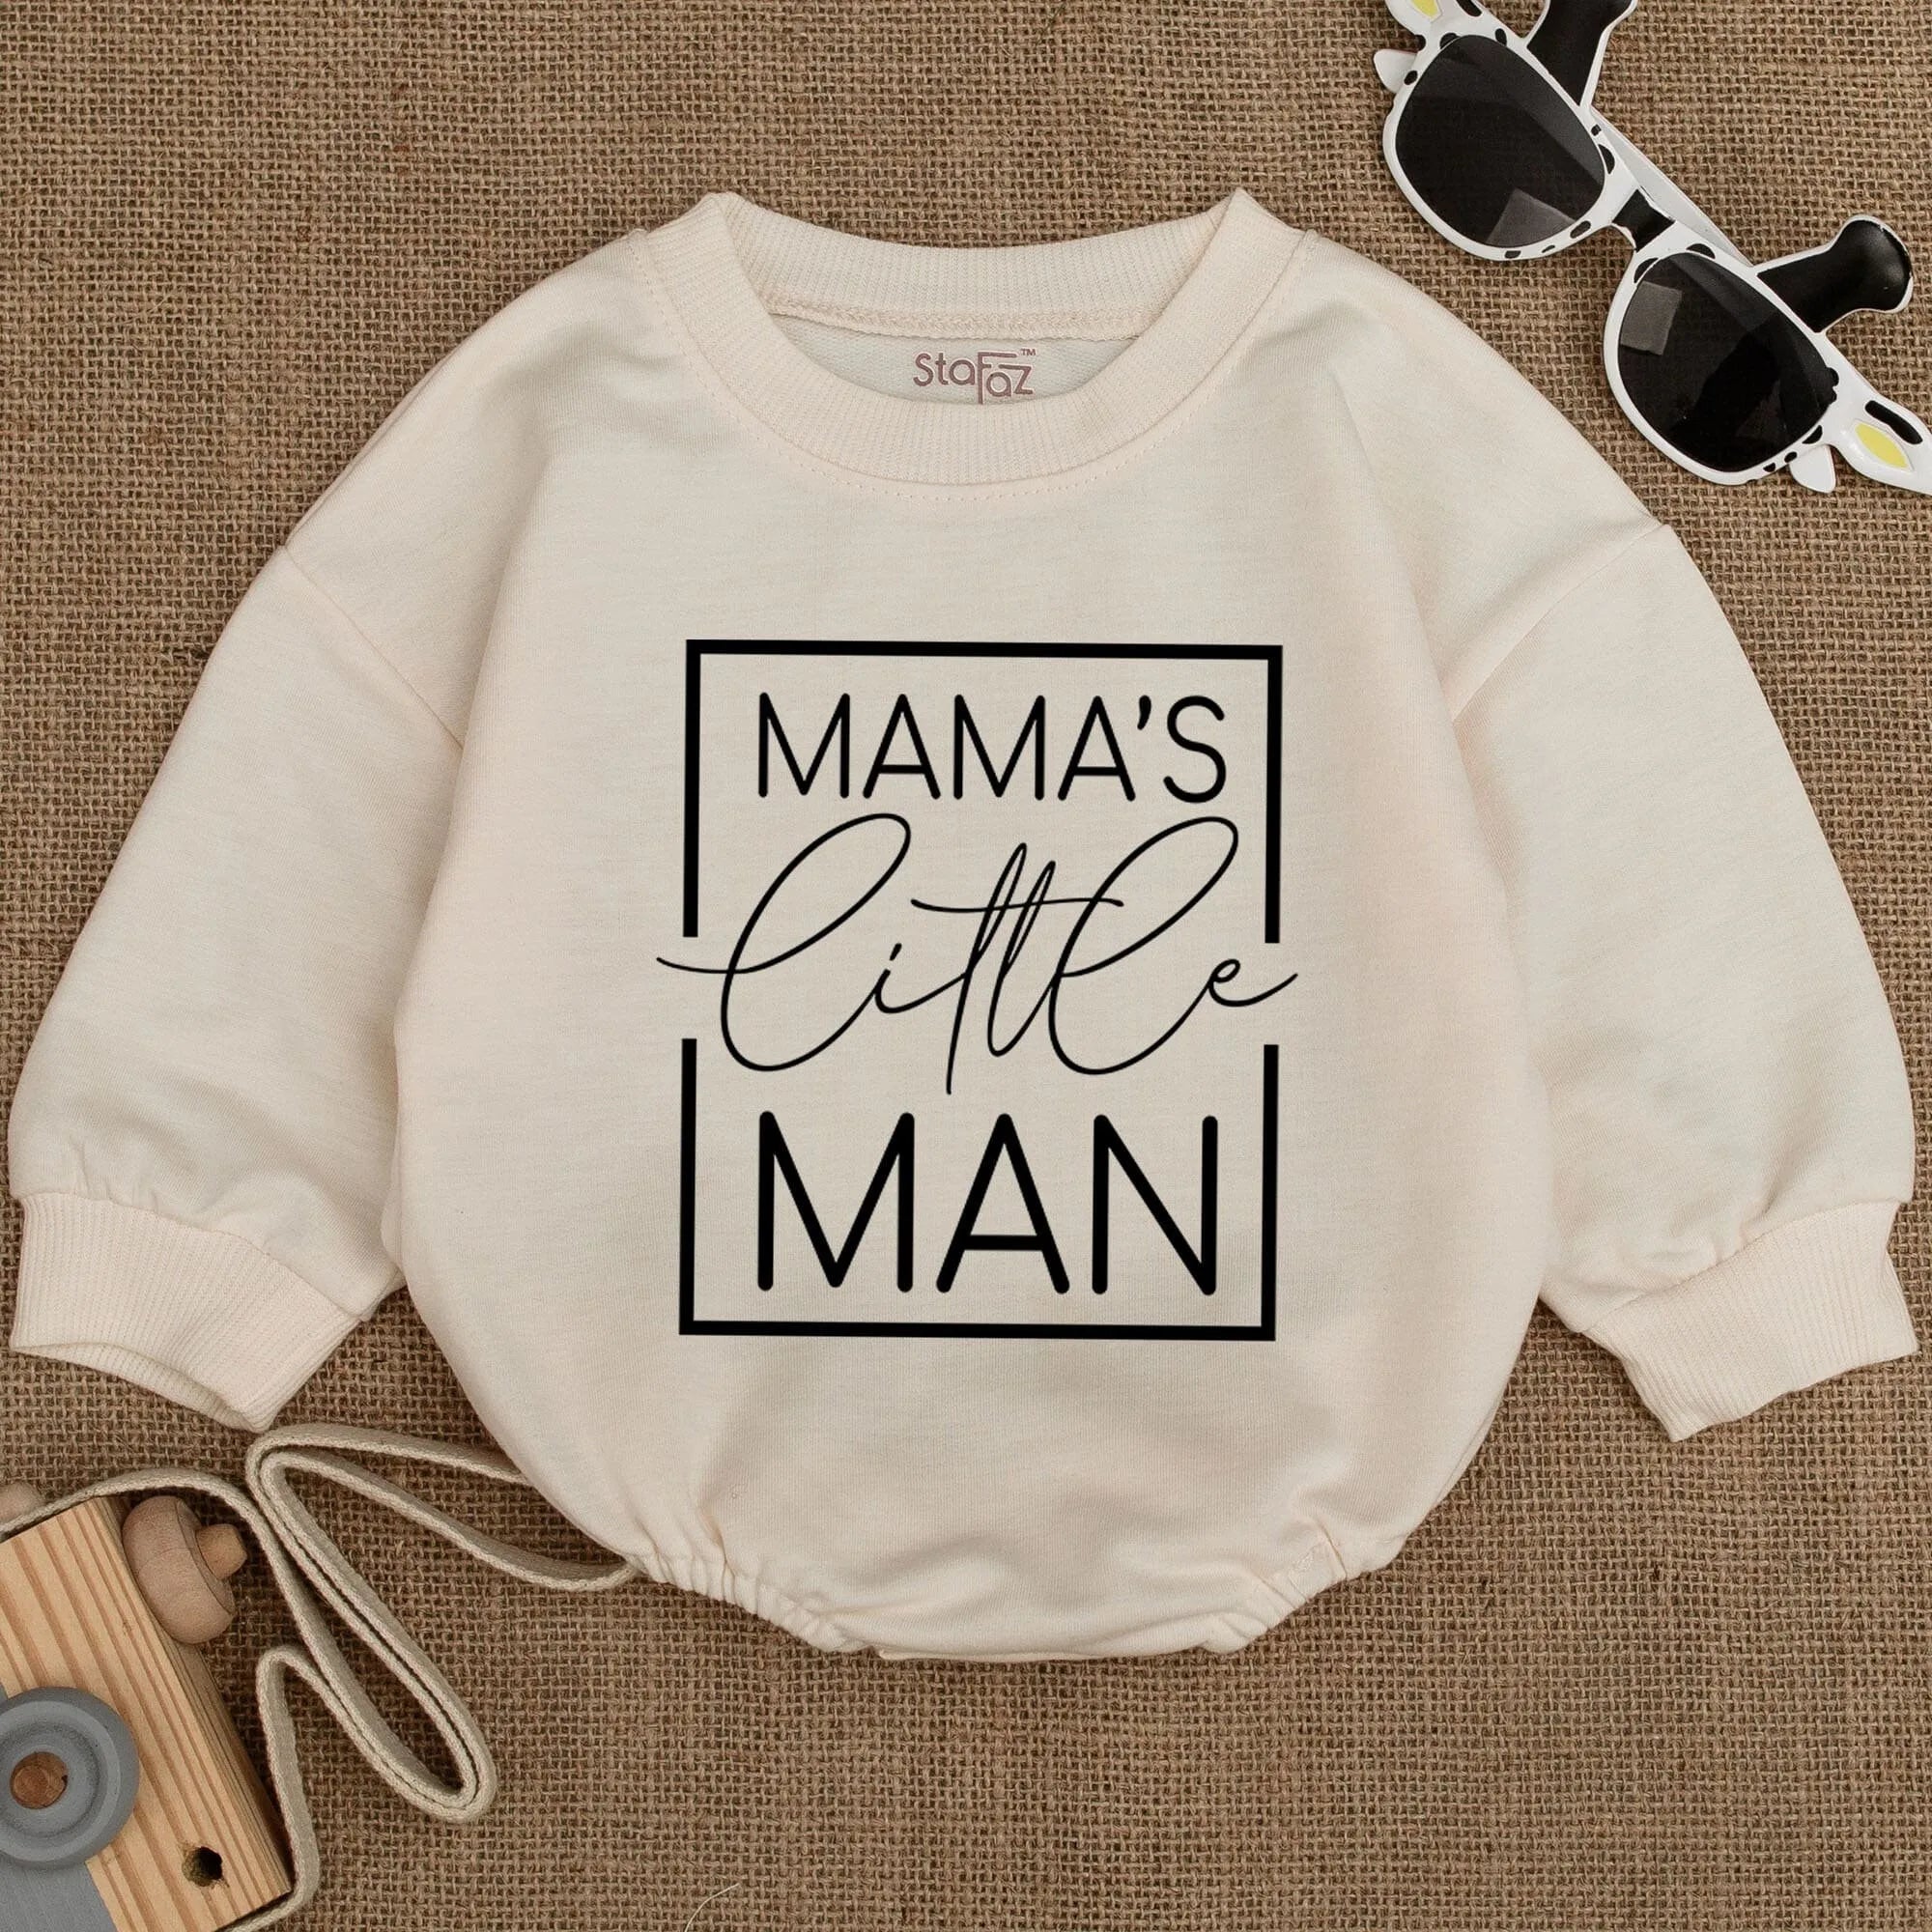 Mama's Little Man Romper , Mama's Little Man Bodysuit , Mama's Boy Shirt , Romper for Baby Boy, Baby Boy Outfit, Gift For Baby Boy